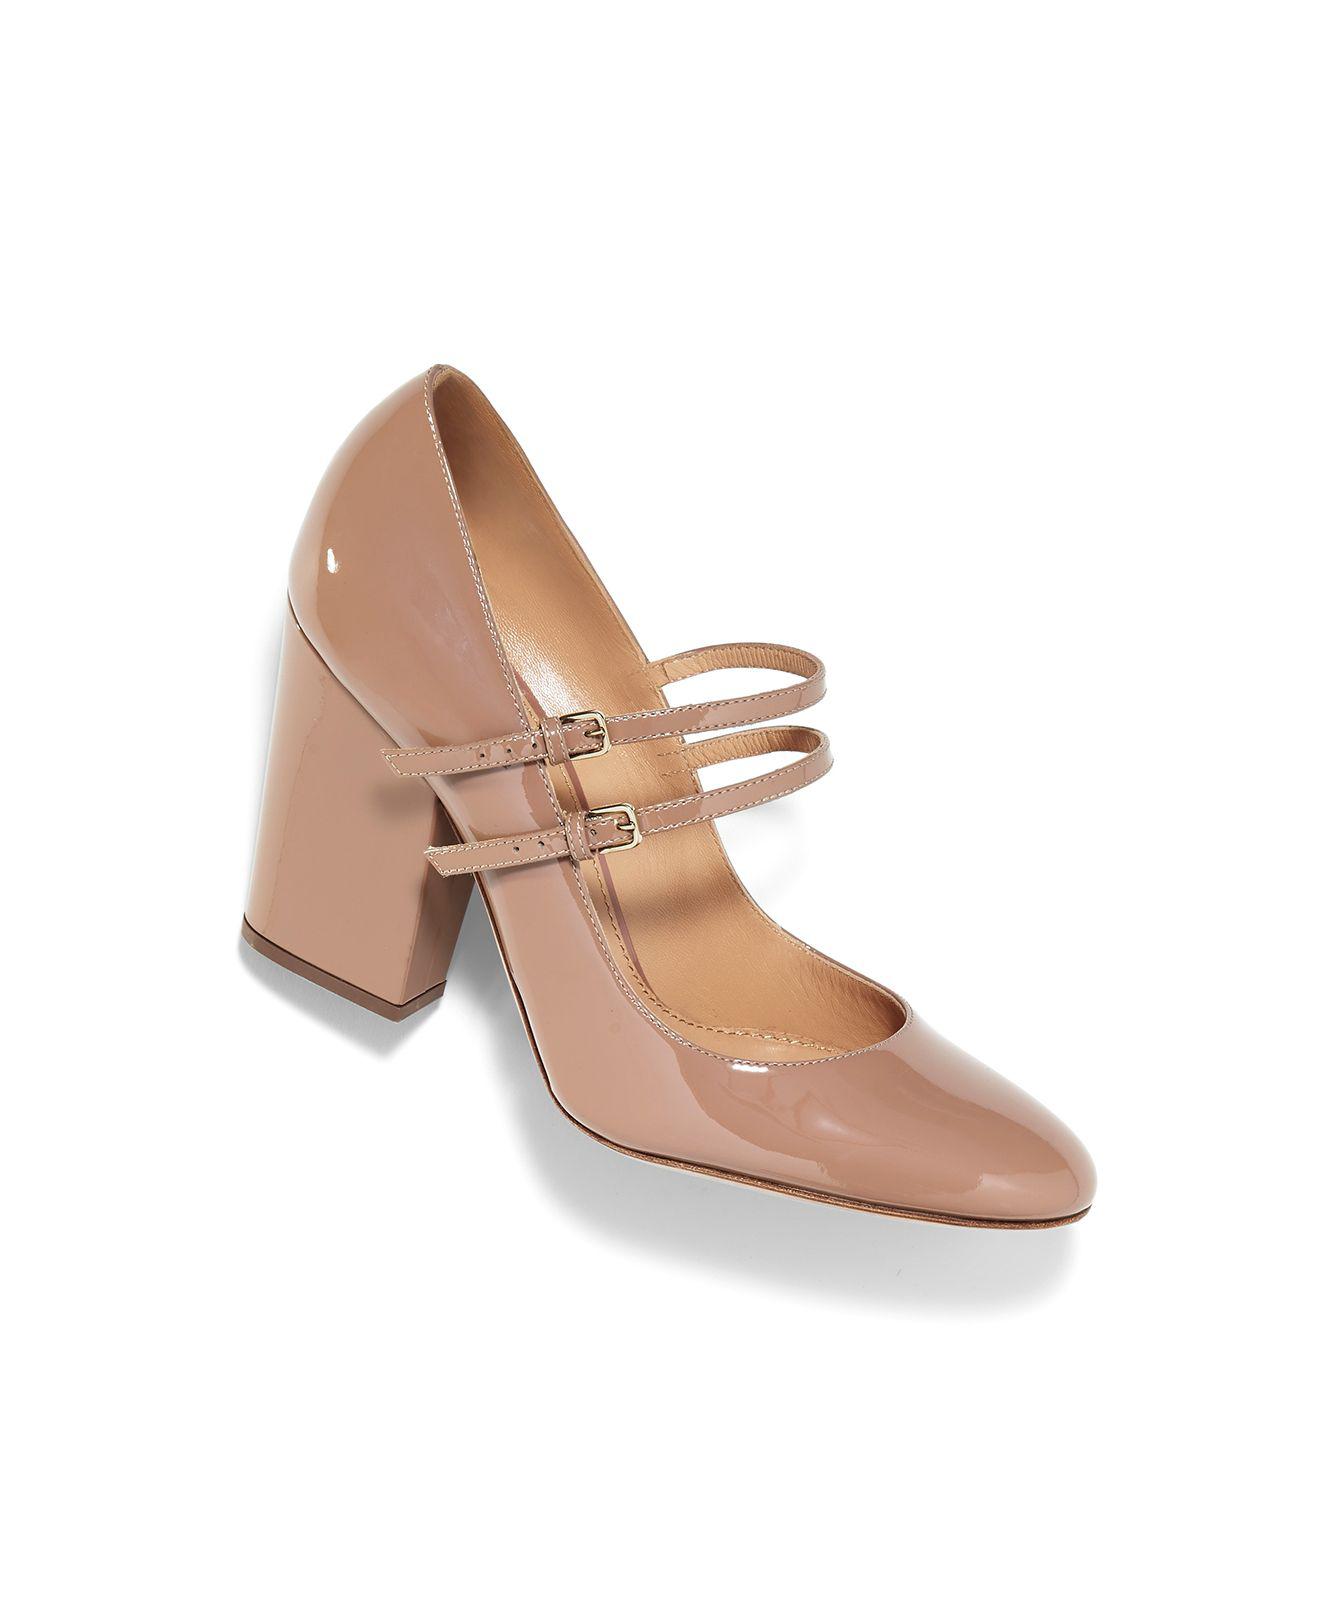 Sergio Rossi Leather Betty Mary Jane Block Heel Pumps in Pink - Lyst